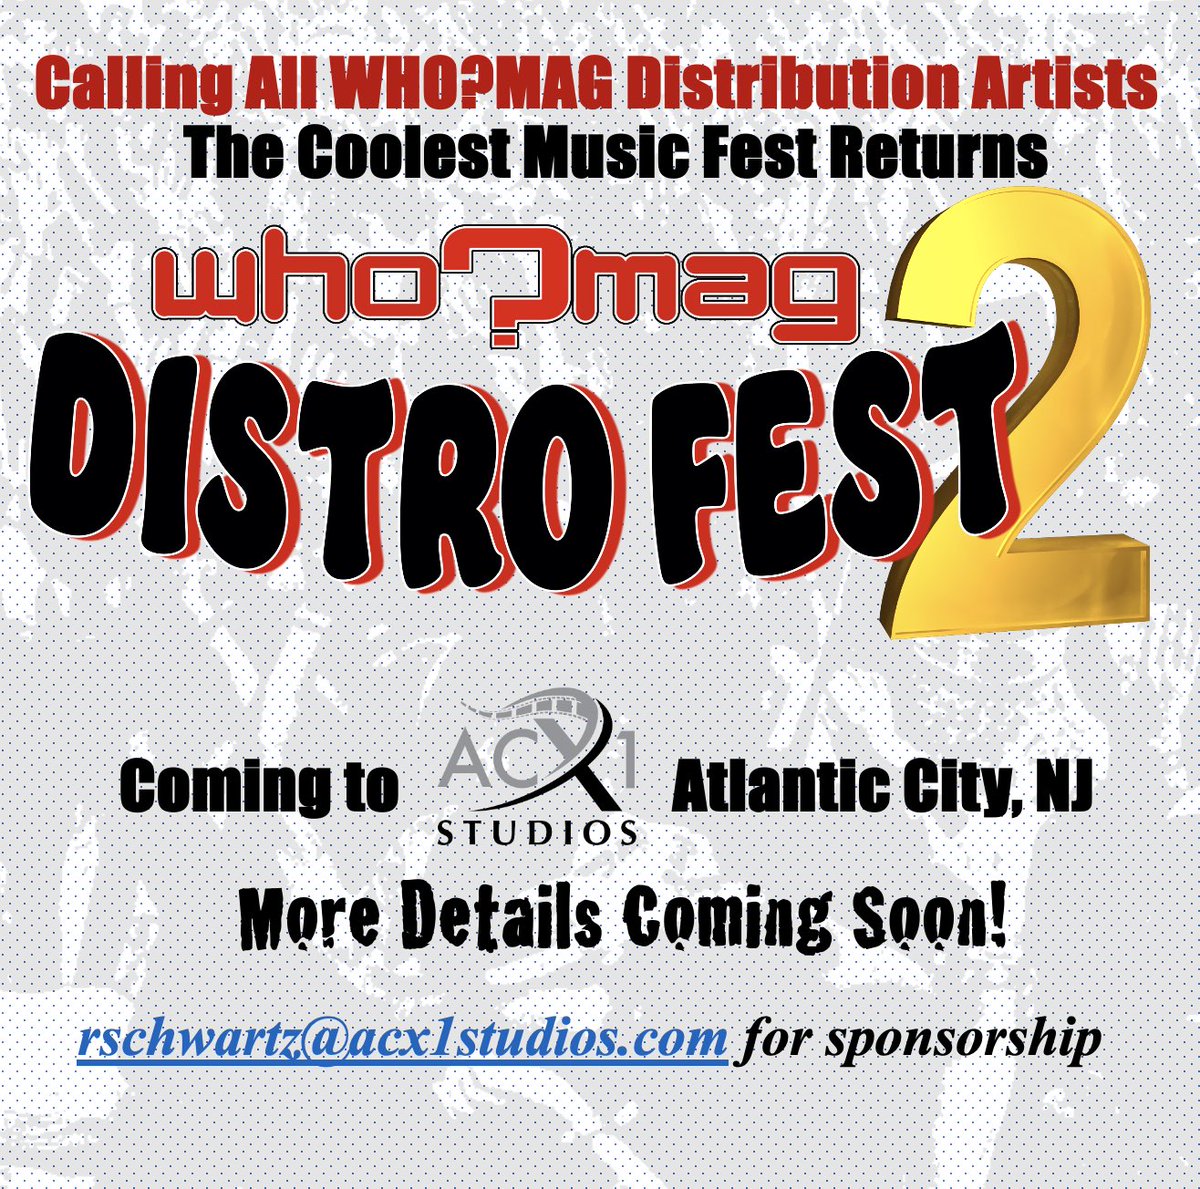 Distro Fest 2! Coming to our new building @acx1studios in Atlantic City, NJ. The coolest and biggest music distribution festival returns. This year we do it… over the OCEAN! More details coming soon! #distrofest #distrofest2023 #whomag #acx1 #acx1studios #atlanticcity